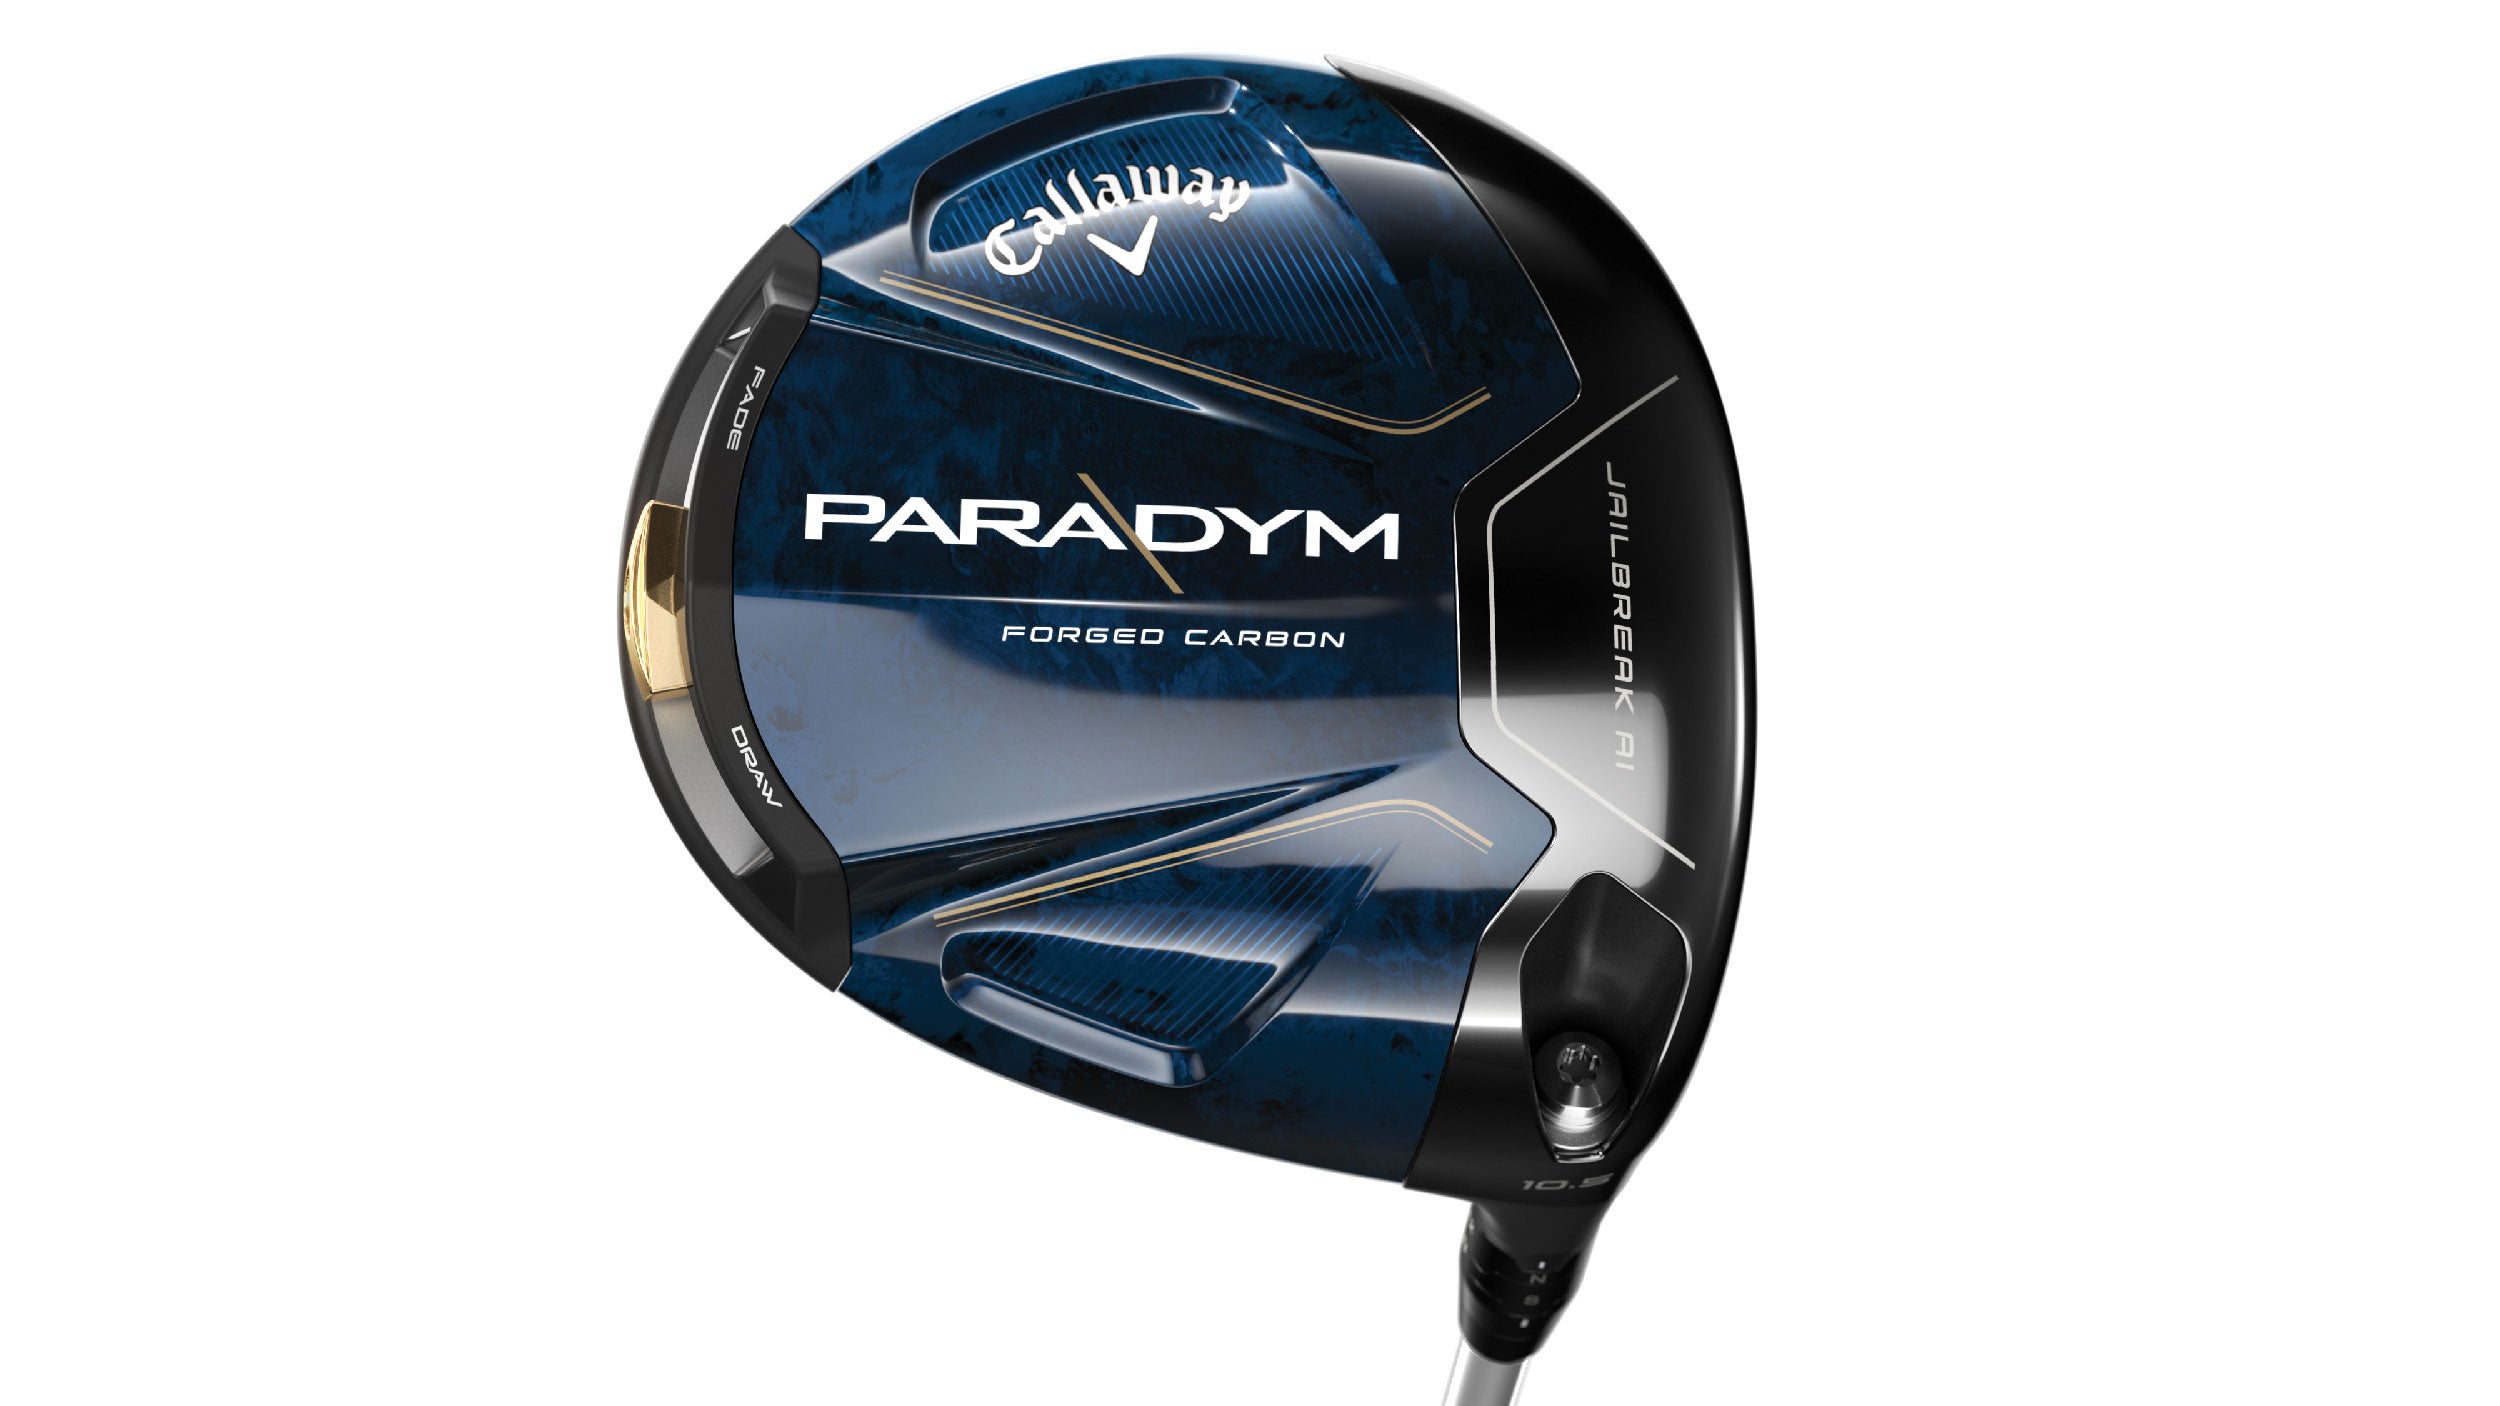 Callaway Paradym drivers: Full reviews, robotic testing info and more